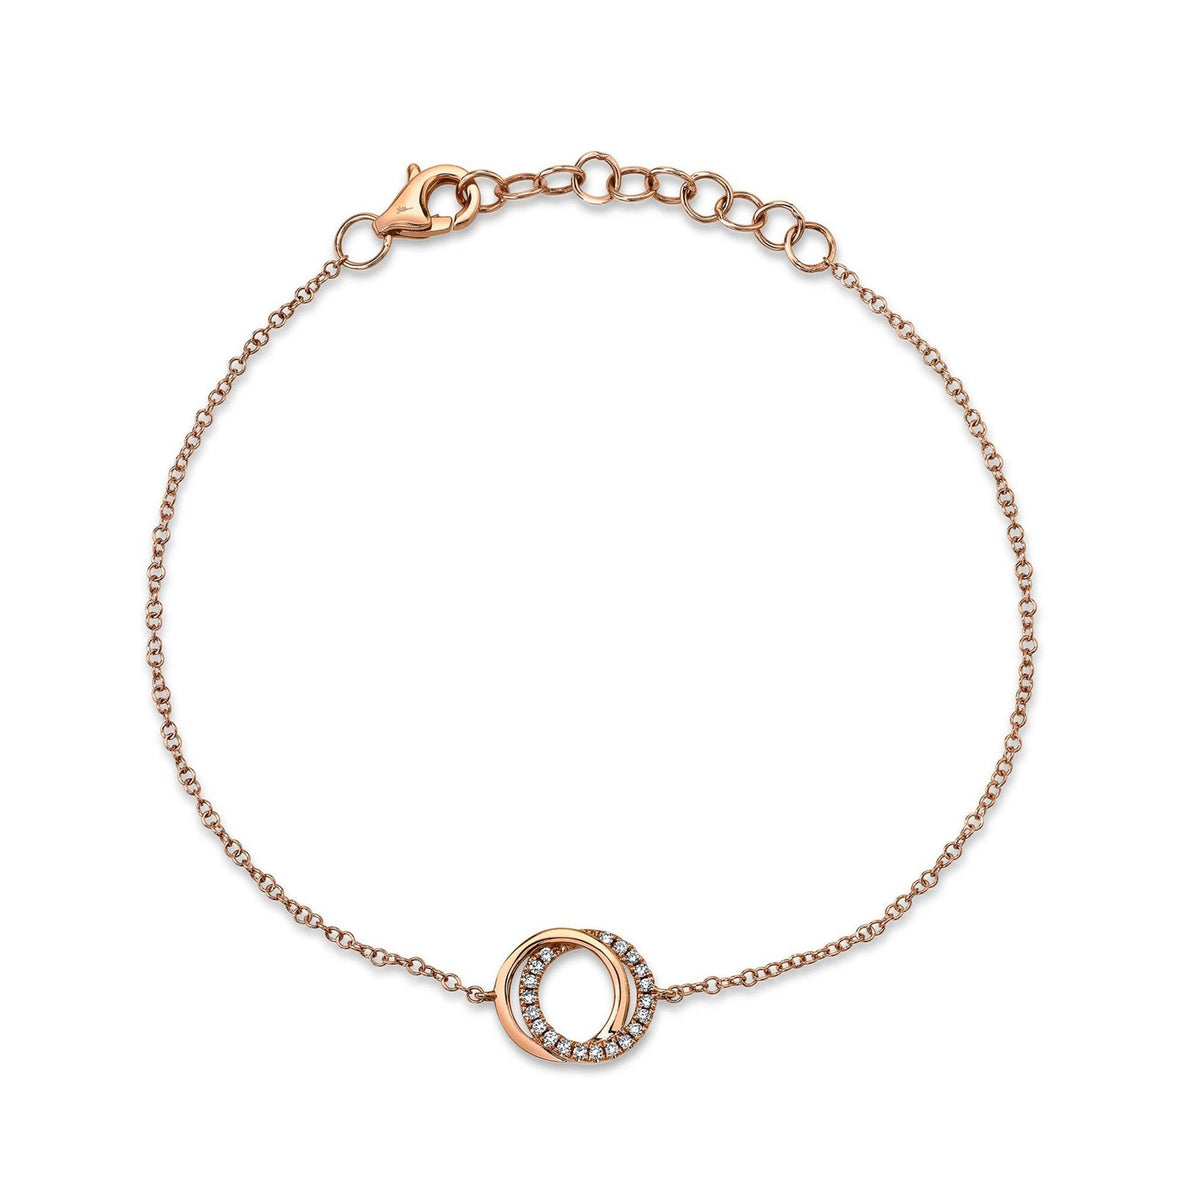 Shy Creation 14Kt Rose Gold You & Me Intersecting Circle Bracelet With Natural Diamonds